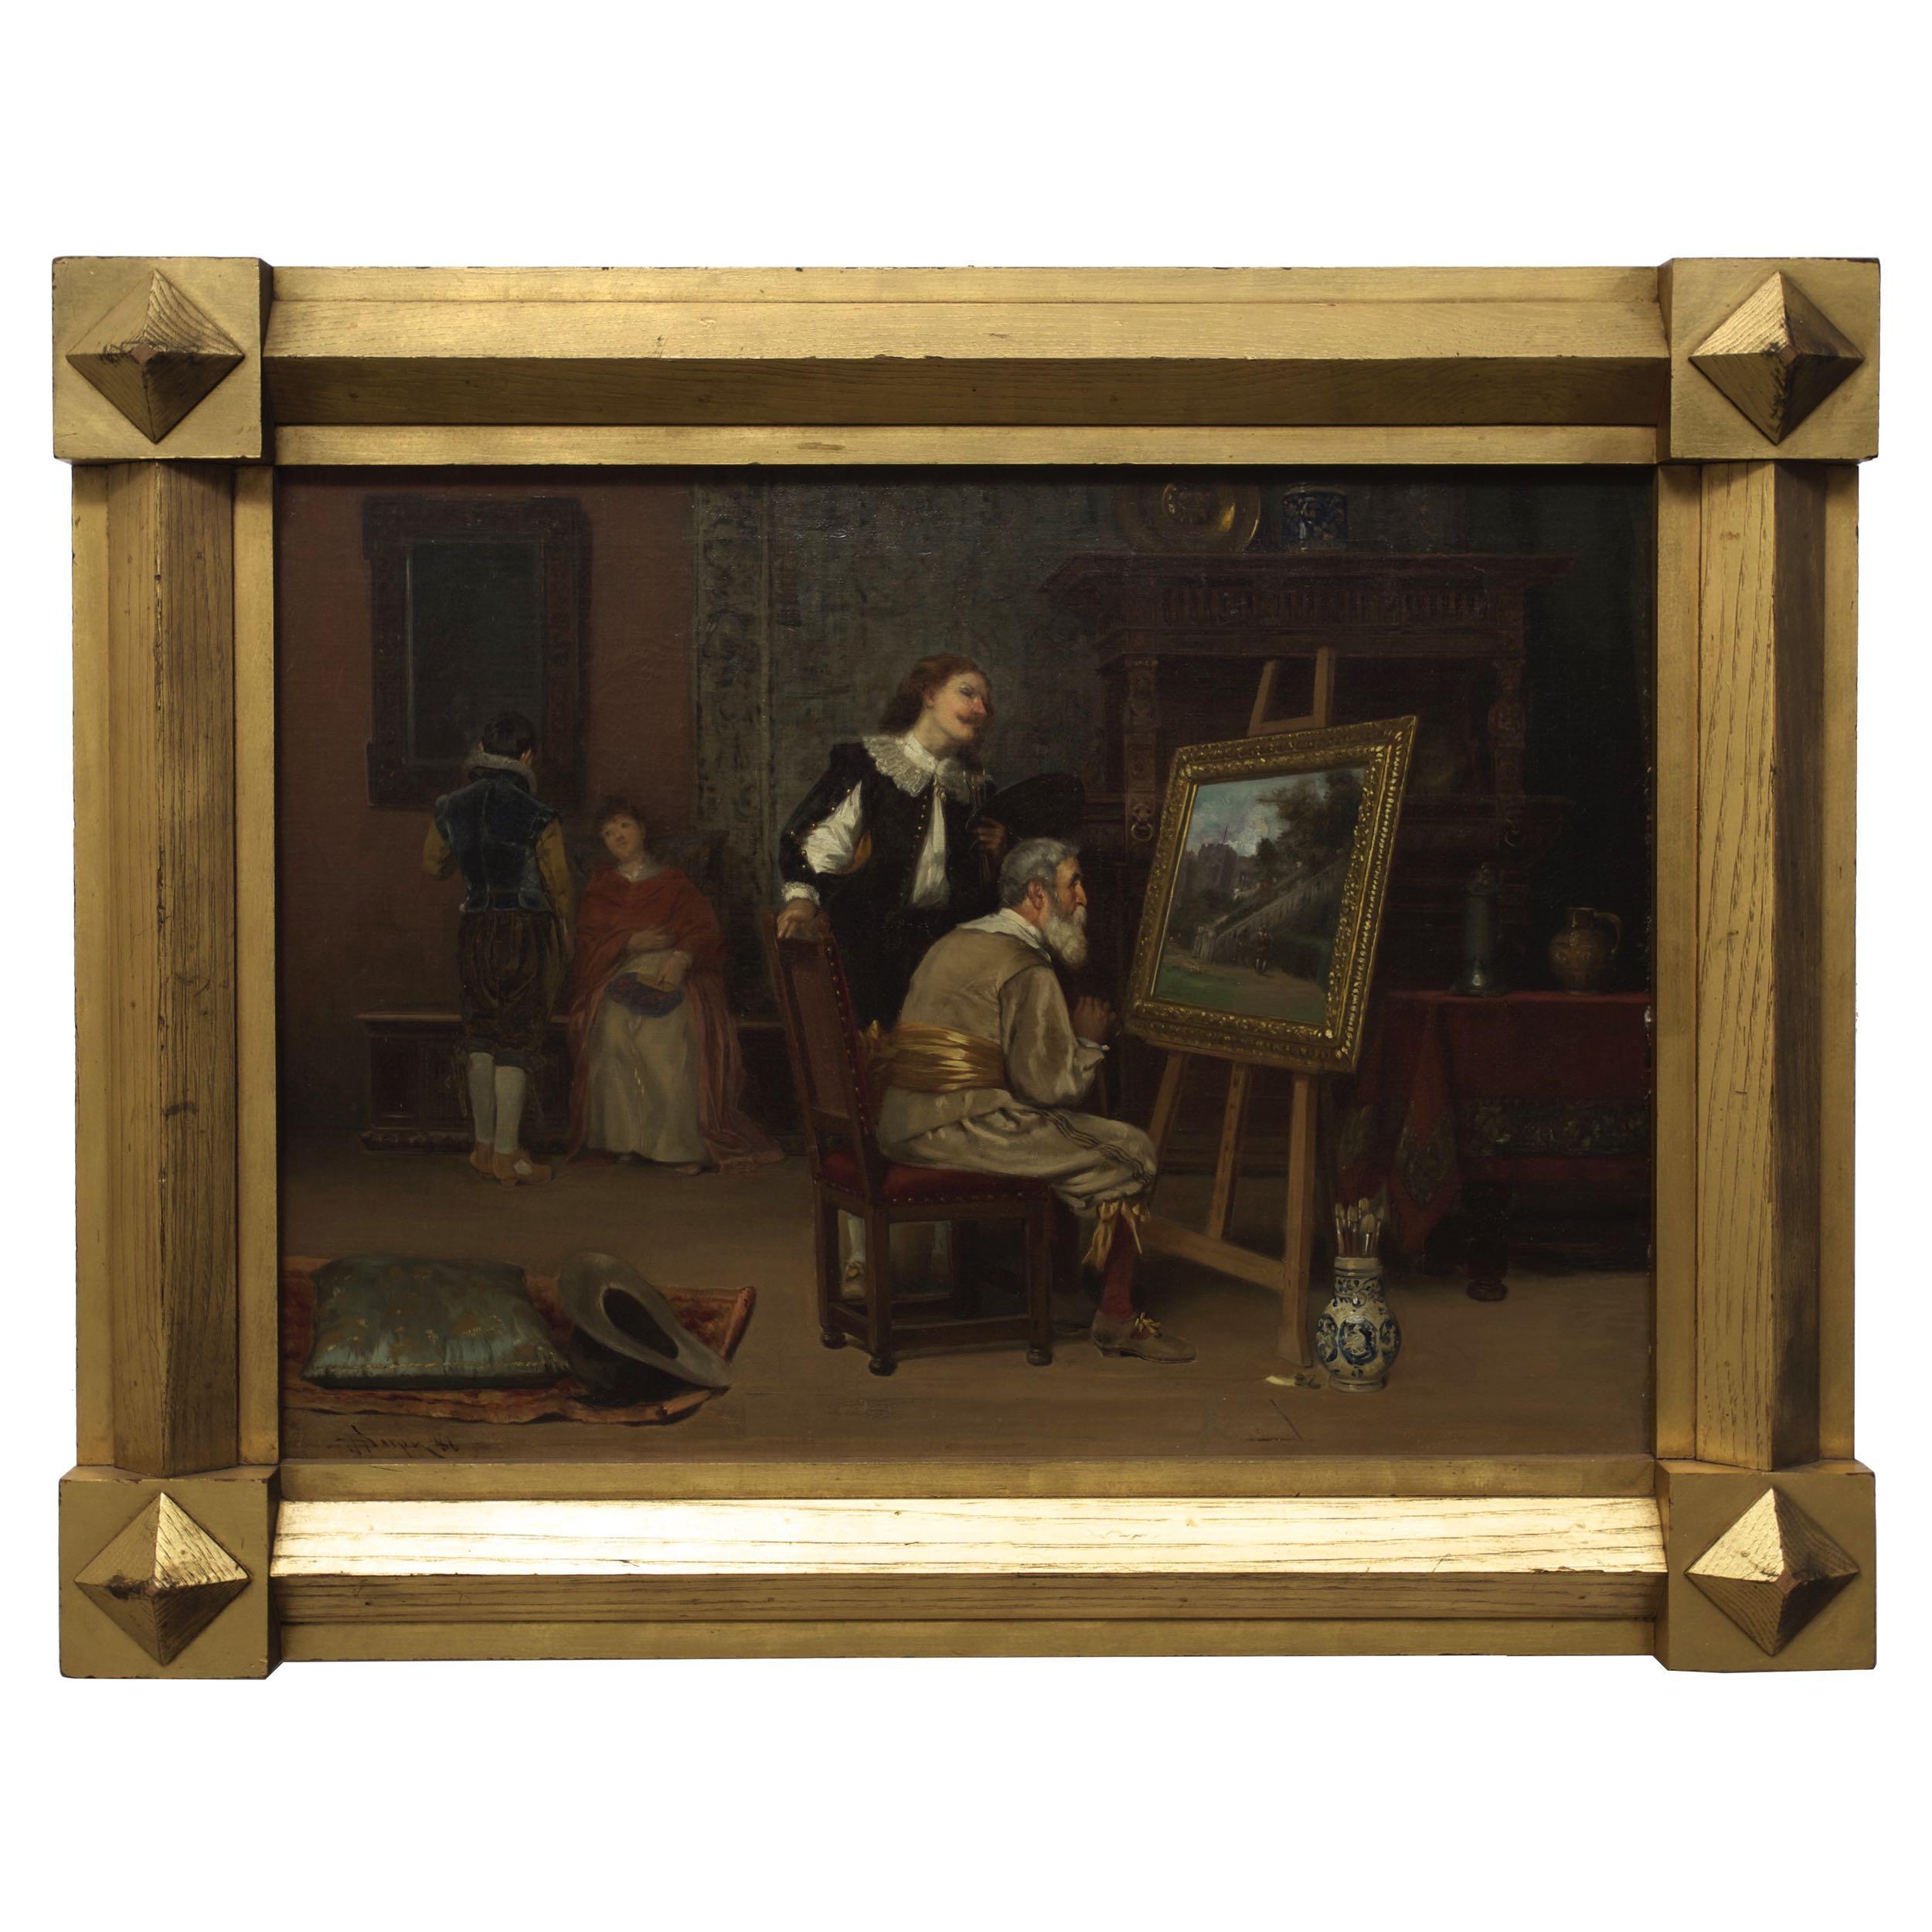 A humorous look at the relationship between the artist and his patron, Dolph (1835-1903) provides a historical context to this timeless moment by rooting it in the late medieval with period correct attention to even the smallest details. The patron